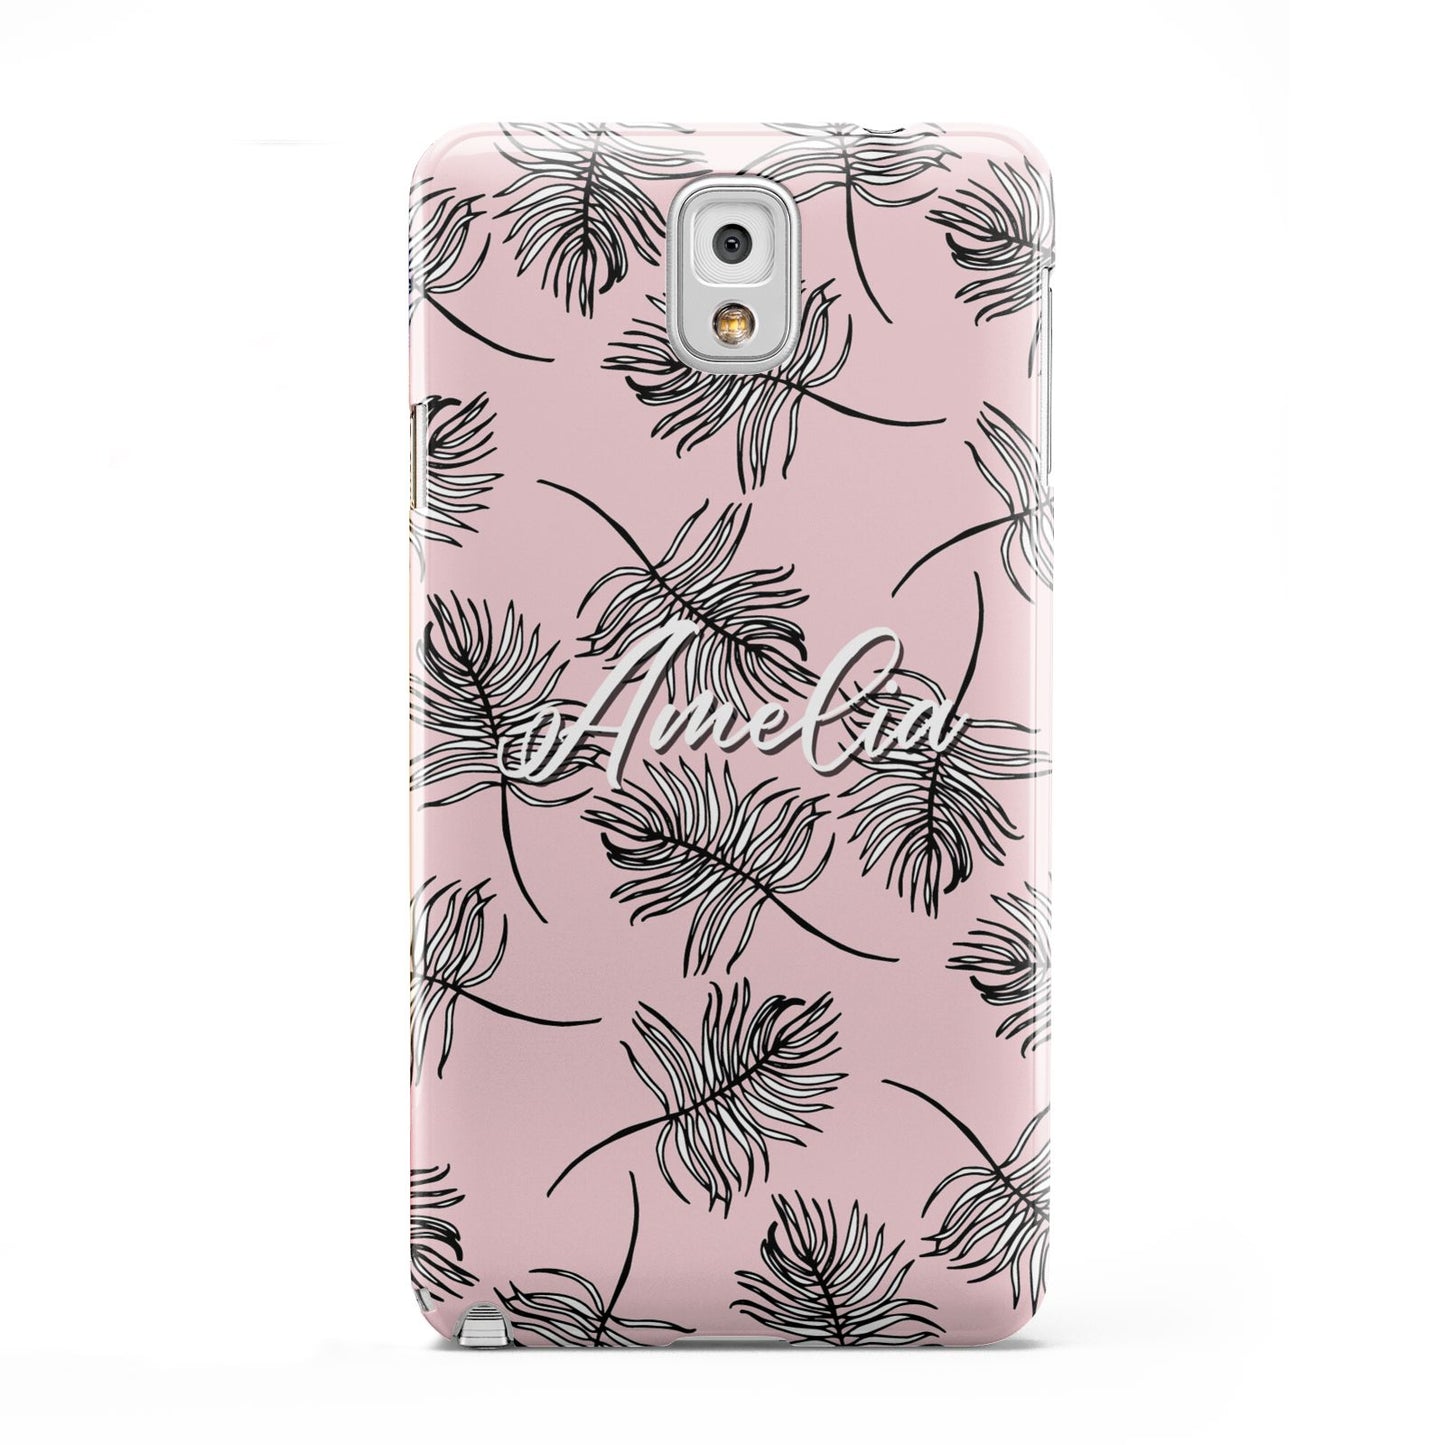 Personalised Pink Monochrome Tropical Leaf Samsung Galaxy Note 3 Case